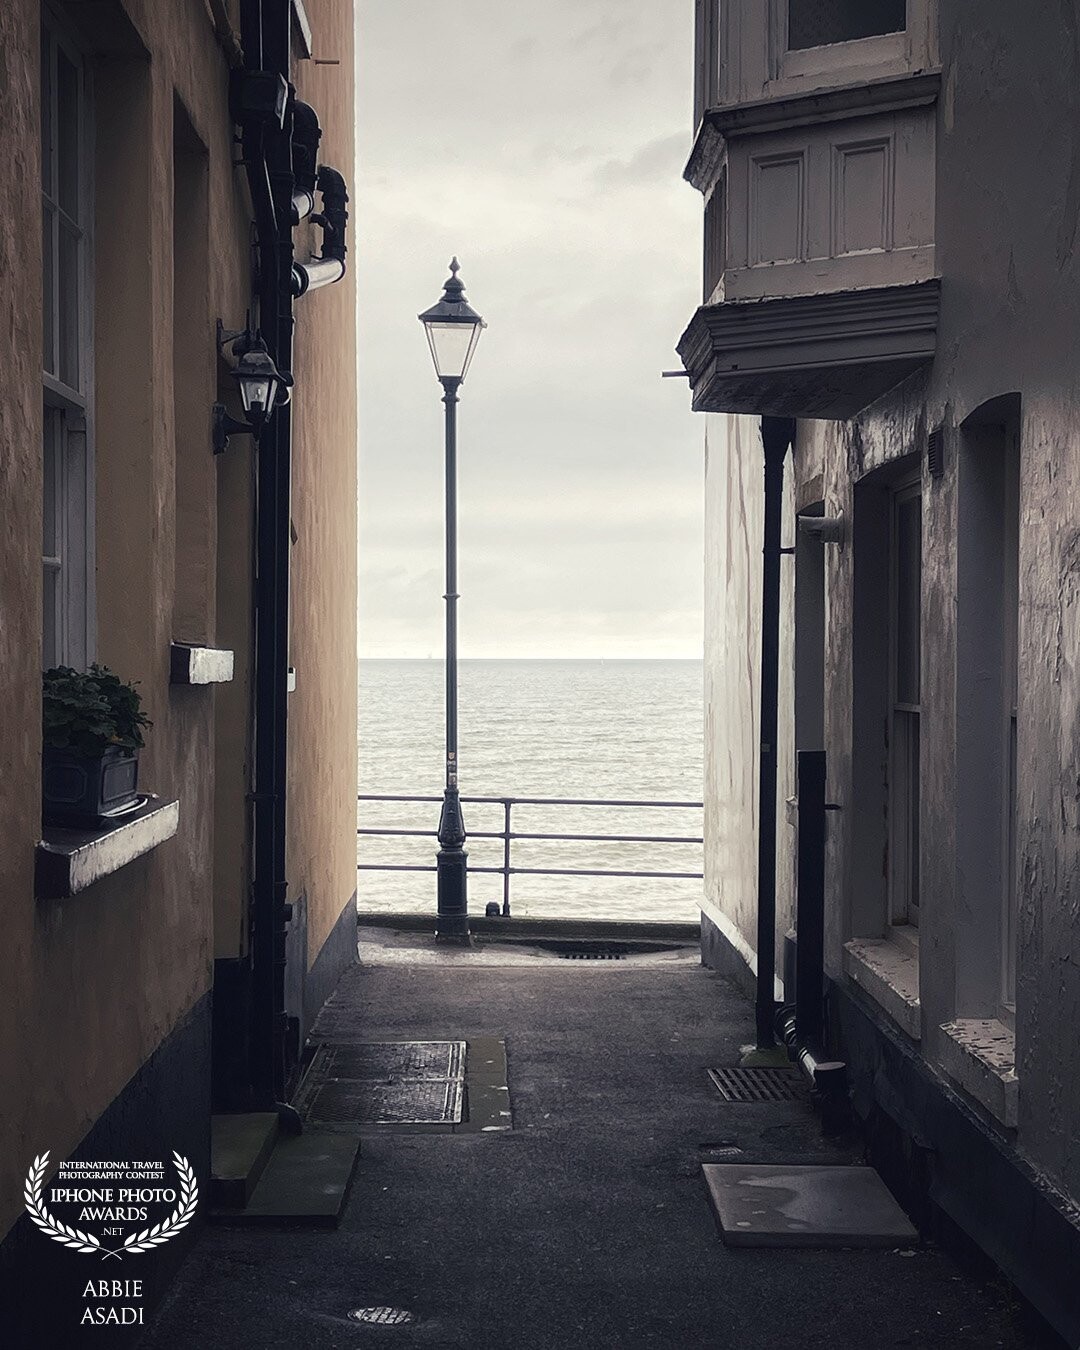 Glimpses of the Cromer sea front in Norfolk. A particularly dull summers day this year but I loved the mood it set. The framing was a dream too!